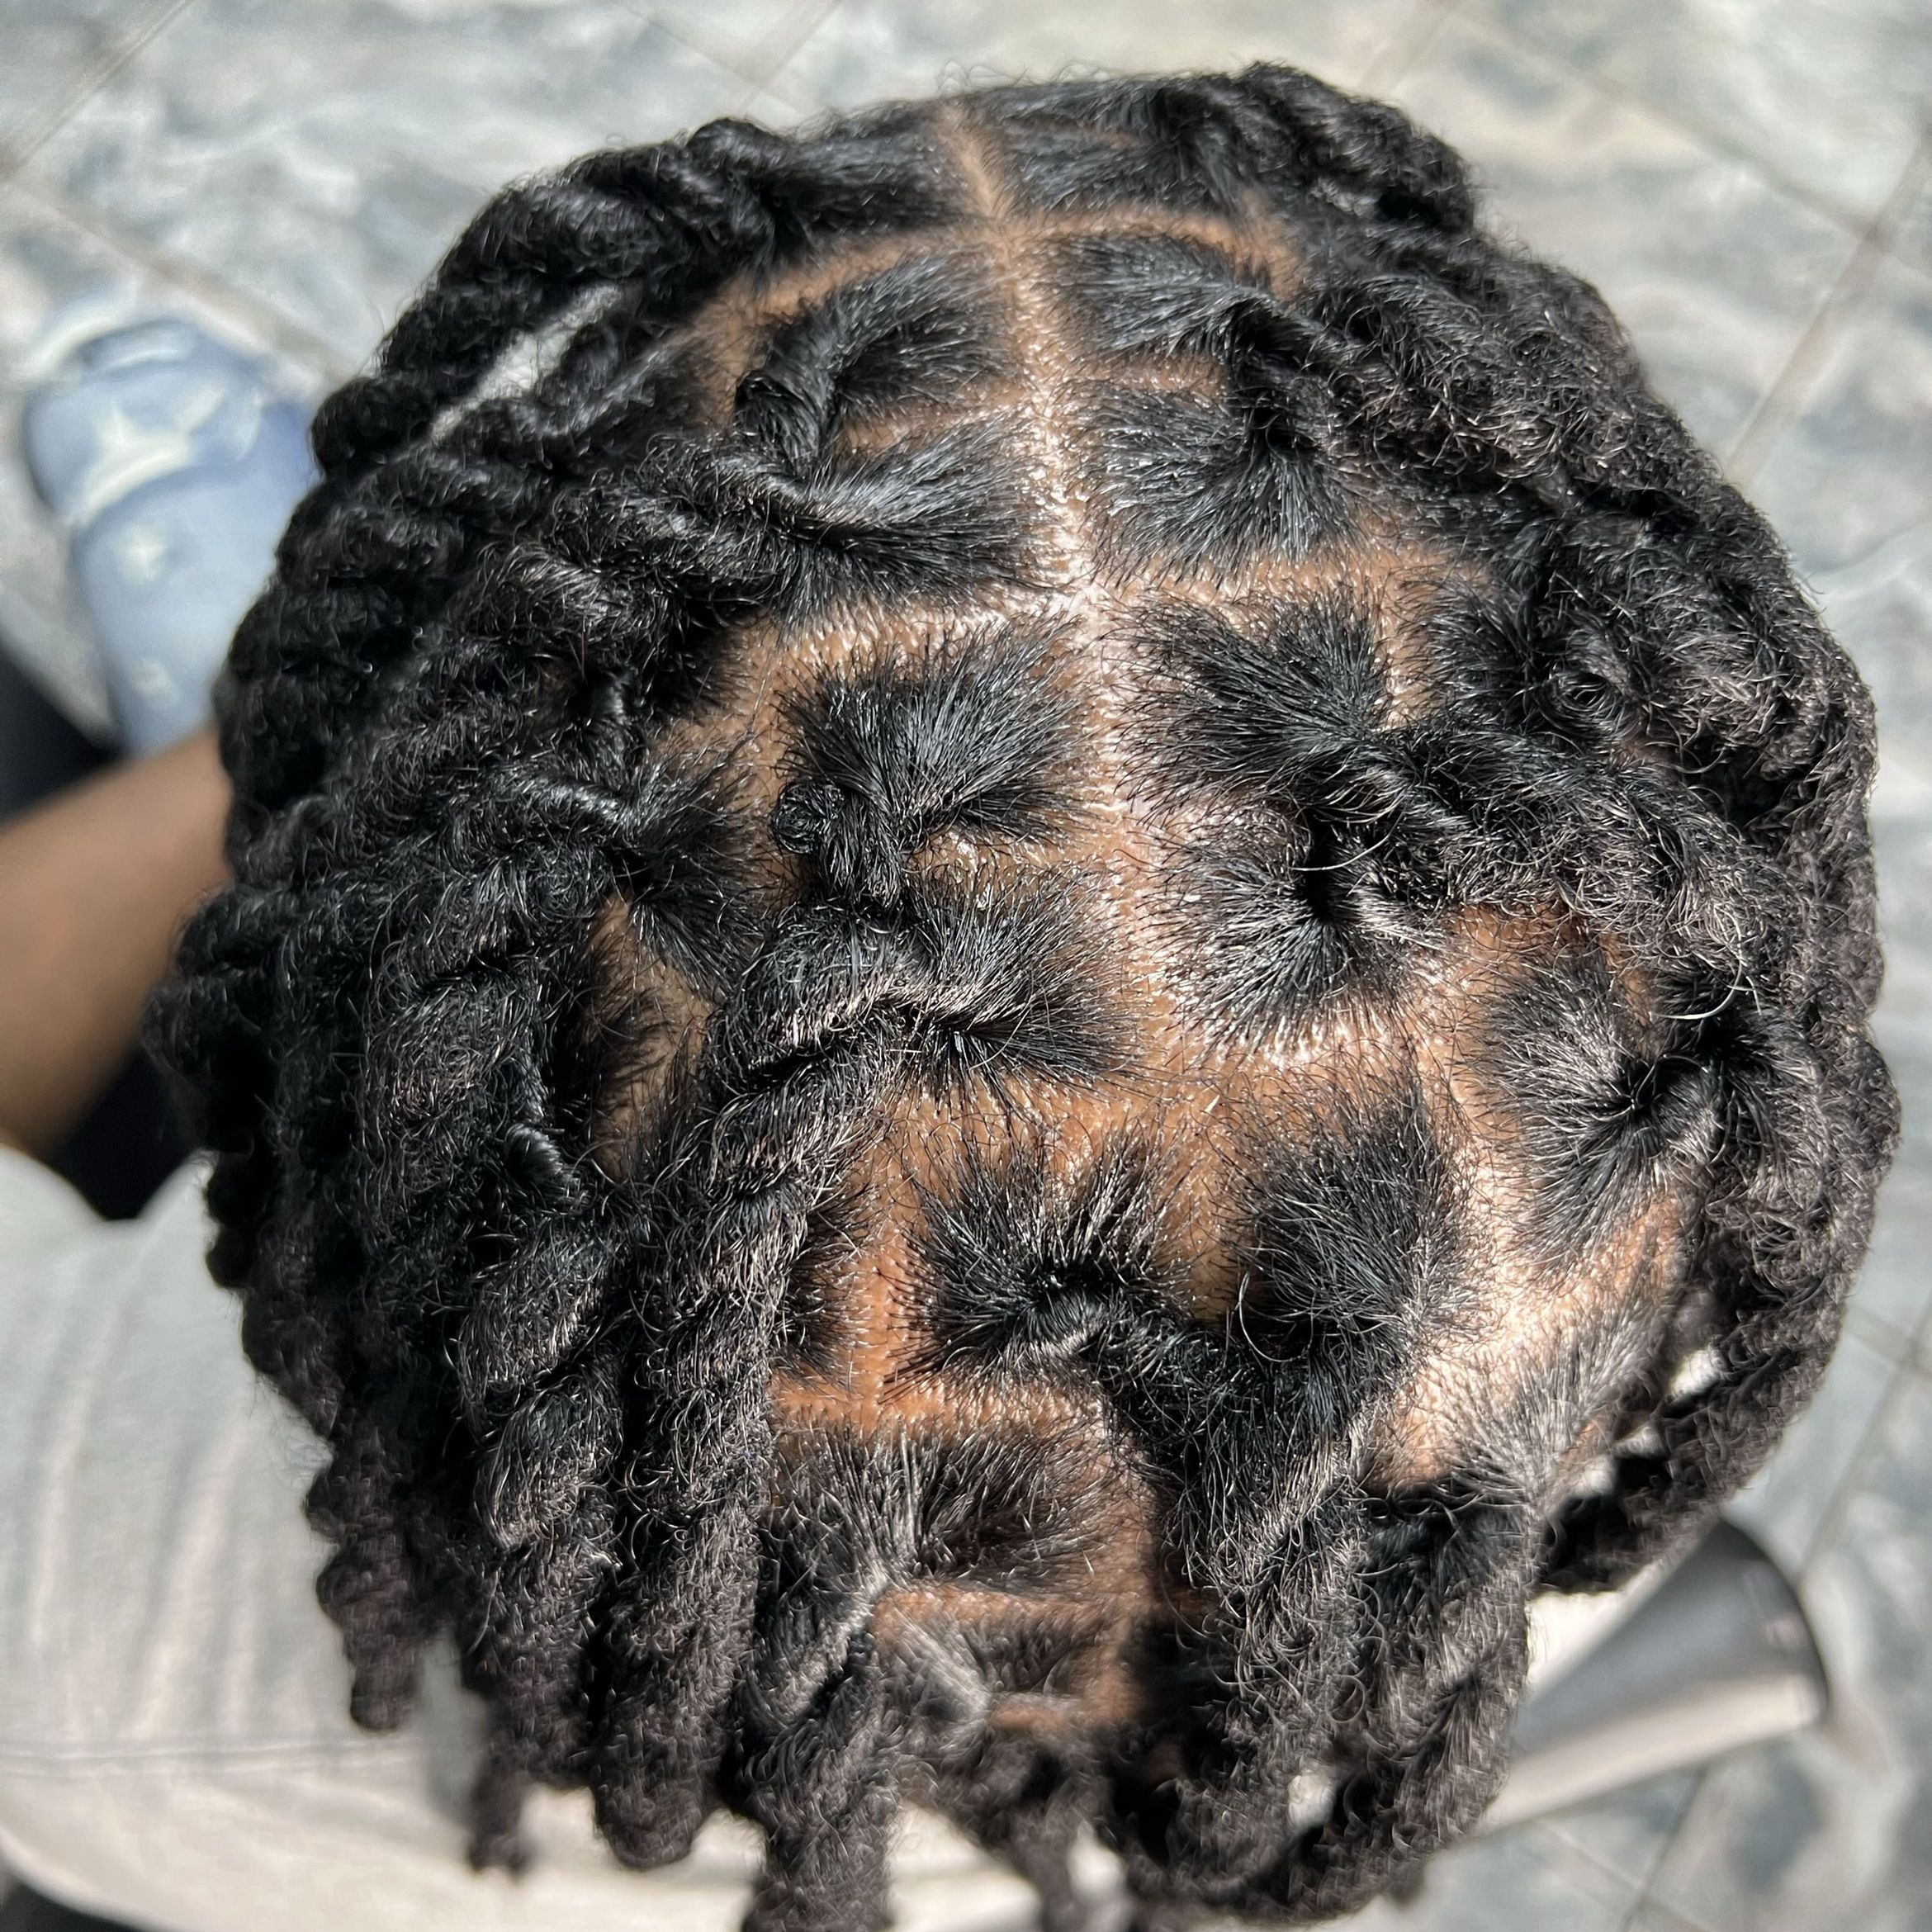 Dreads extensions with 💯 human locs portfolio